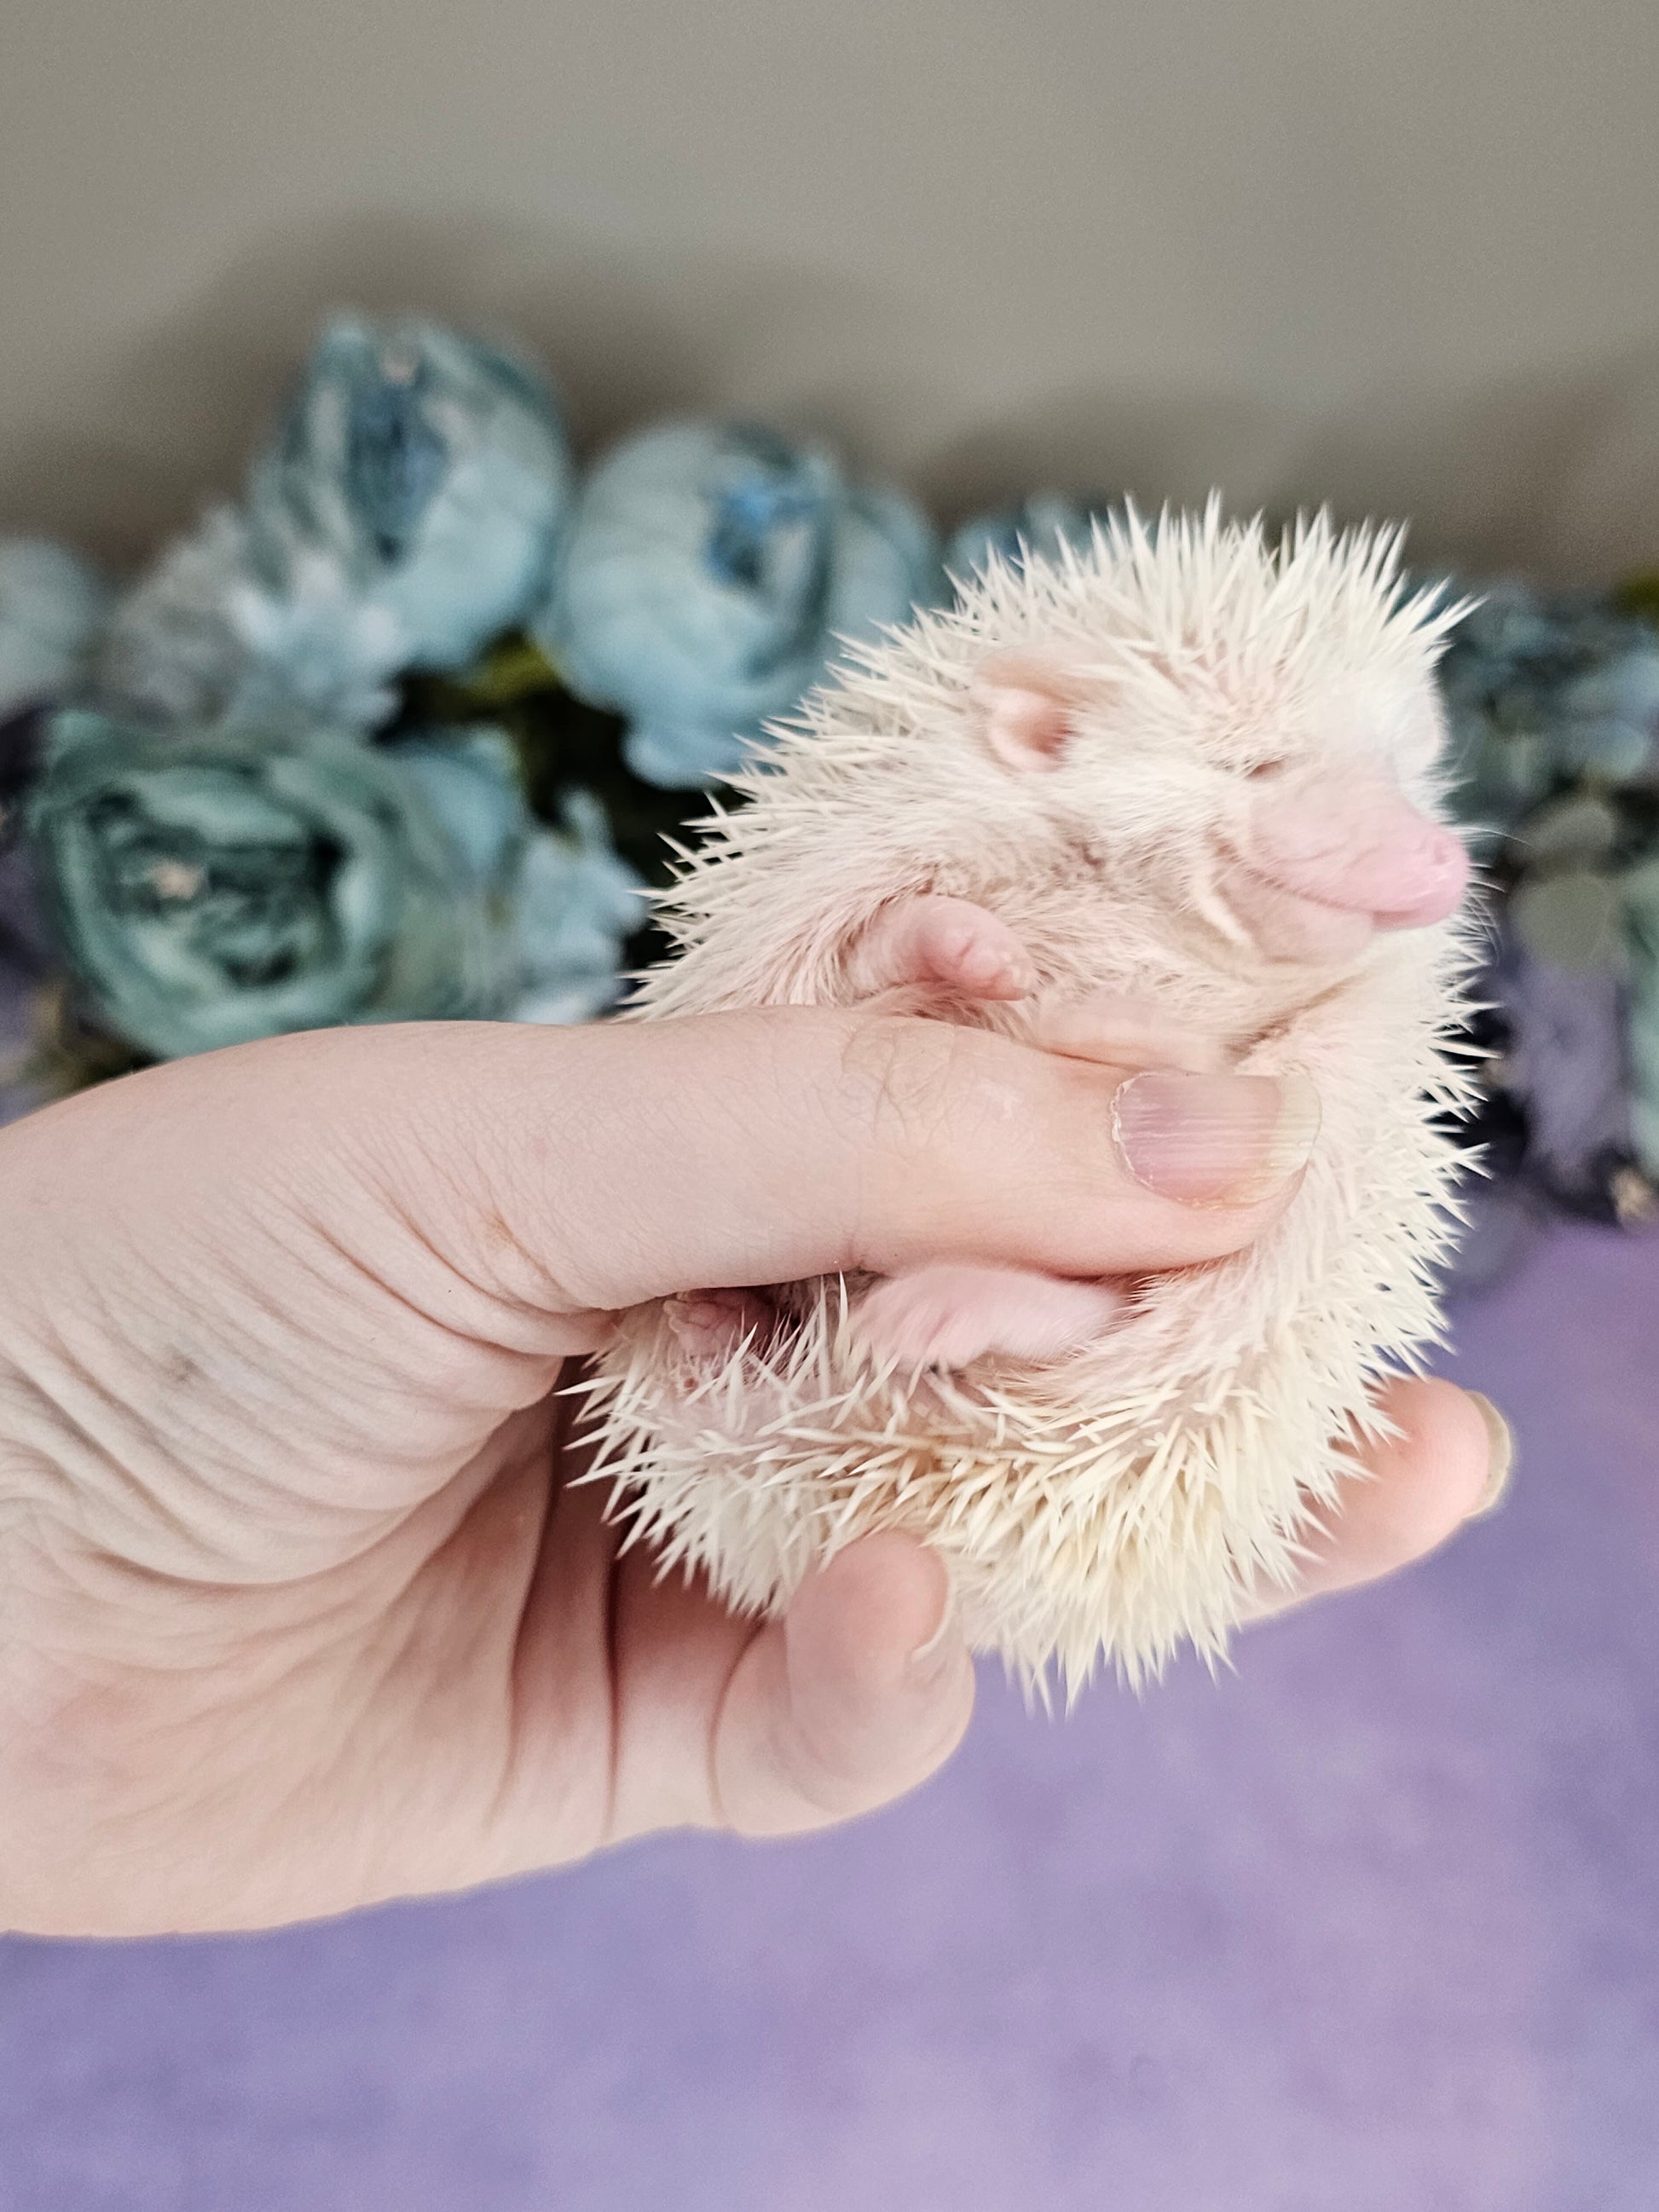 shows a white furred hedgehog with white quills against a backdrop of artifical flowers